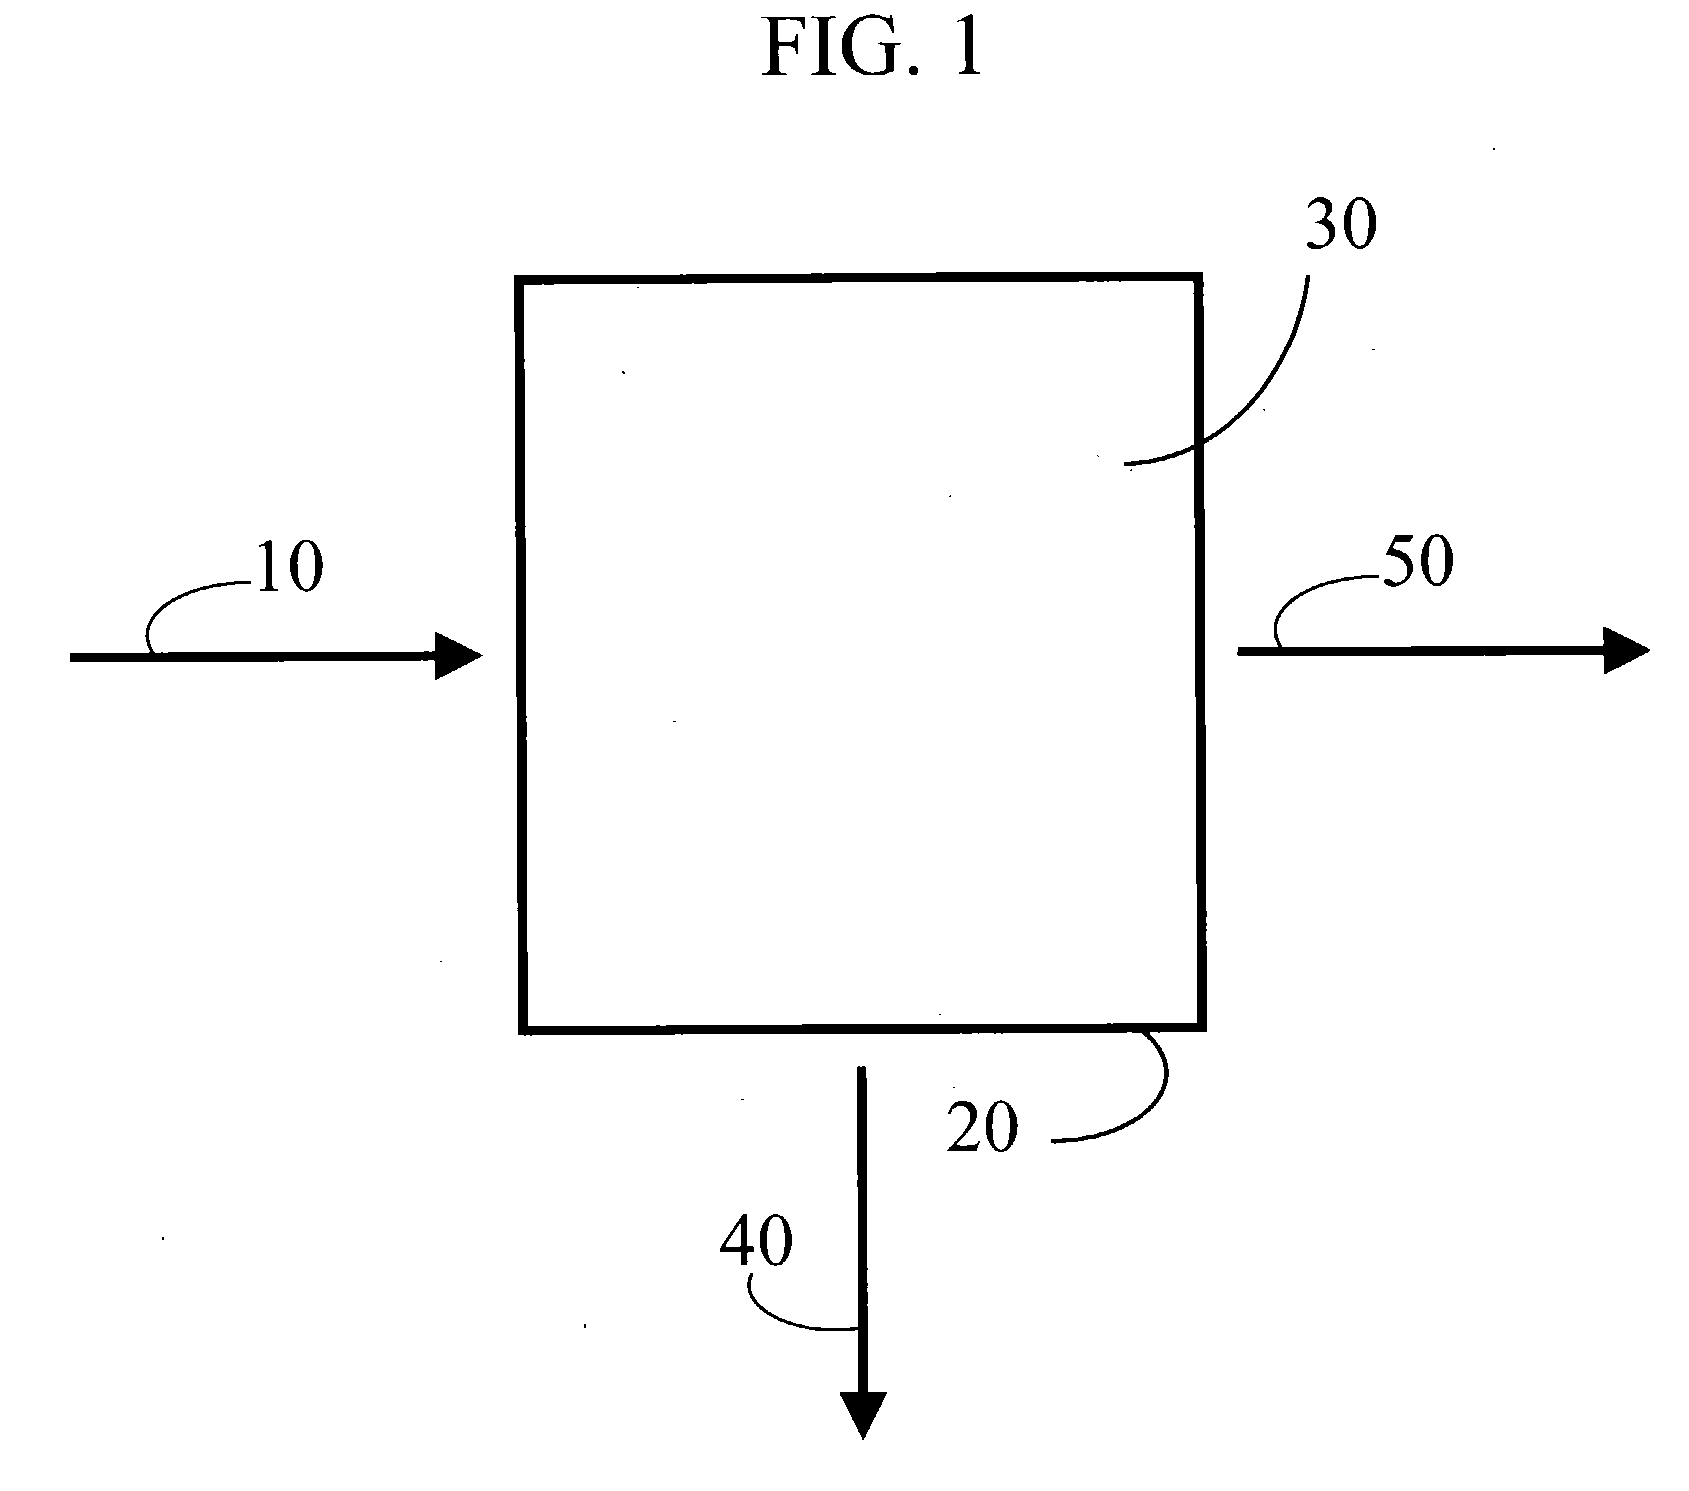 Method of removing mecury from exhaust gases